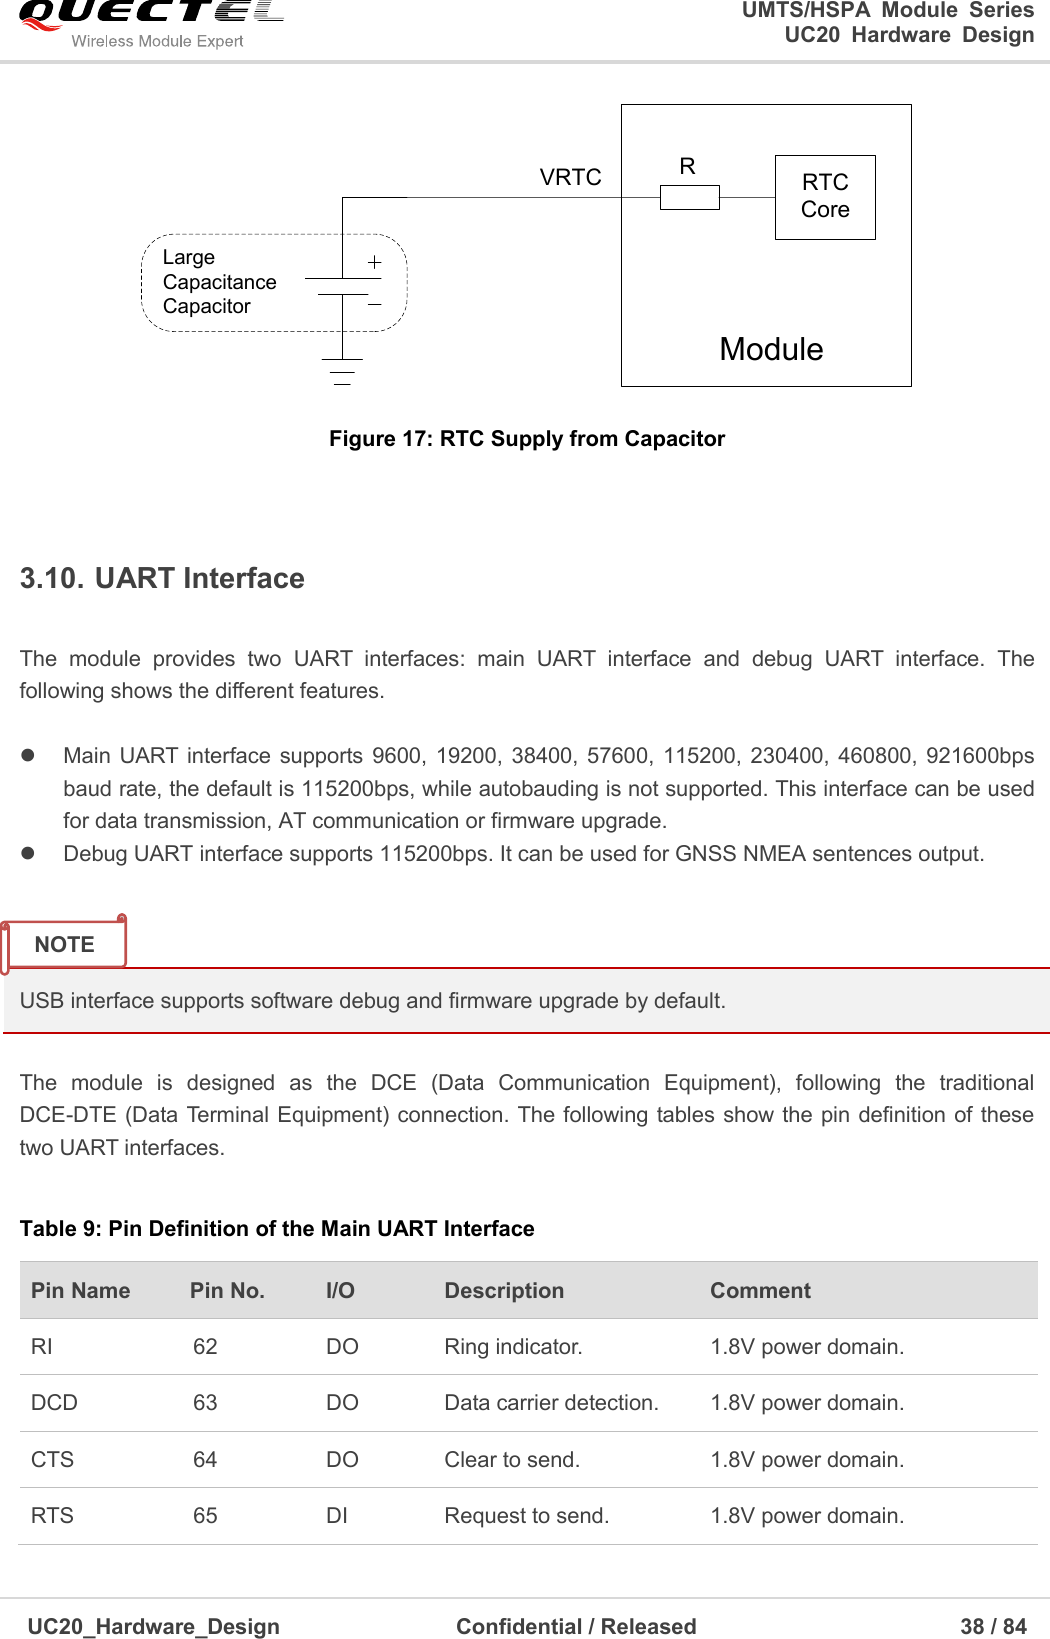                                                                                                                                               UMTS/HSPA  Module  Series                                                                 UC20  Hardware  Design  UC20_Hardware_Design                  Confidential / Released                            38 / 84     Large Capacitance CapacitorModuleRTC CoreRVRTC Figure 17: RTC Supply from Capacitor  3.10. UART Interface  The  module  provides  two  UART  interfaces:  main  UART  interface  and  debug  UART  interface.  The following shows the different features.    Main UART  interface supports  9600,  19200, 38400, 57600,  115200, 230400, 460800,  921600bps baud rate, the default is 115200bps, while autobauding is not supported. This interface can be used for data transmission, AT communication or firmware upgrade.   Debug UART interface supports 115200bps. It can be used for GNSS NMEA sentences output.     USB interface supports software debug and firmware upgrade by default.    The  module  is  designed  as  the  DCE  (Data  Communication  Equipment),  following  the  traditional DCE-DTE (Data Terminal Equipment) connection. The following tables show the pin definition of these two UART interfaces. Table 9: Pin Definition of the Main UART Interface Pin Name   Pin No. I/O Description   Comment RI 62 DO Ring indicator. 1.8V power domain. DCD 63 DO Data carrier detection. 1.8V power domain. CTS 64 DO Clear to send. 1.8V power domain. RTS 65 DI Request to send. 1.8V power domain. NOTE 